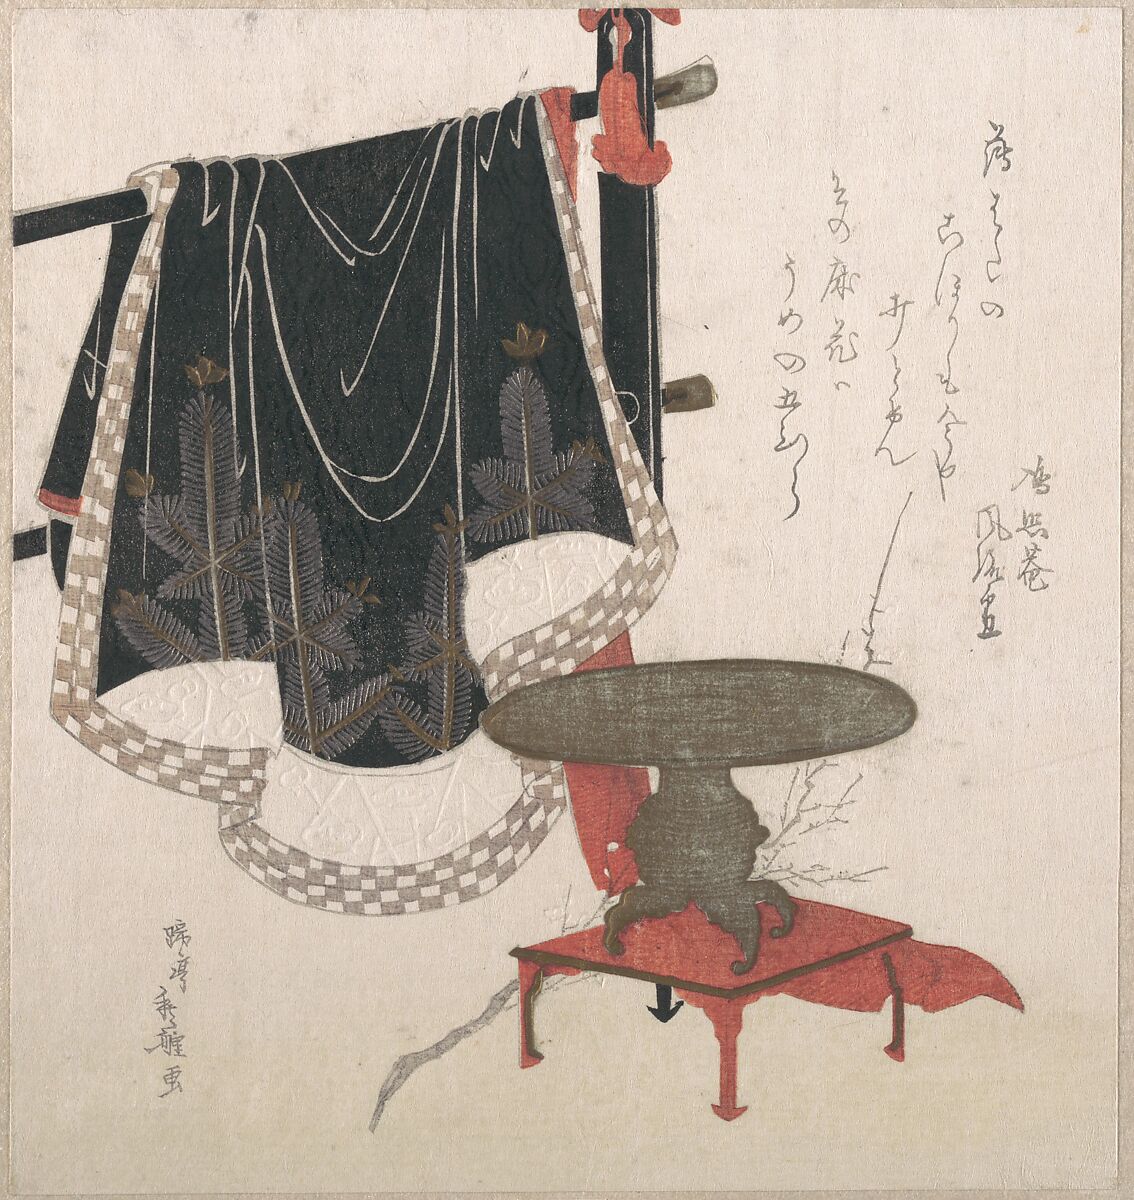 Flower Vase with Stand; Dress Hanging on a Clothesrack, Hachifusa Shūri (Japanese, 18th–19th century), Part of an album of woodblock prints (surimono); ink and color on paper, Japan 